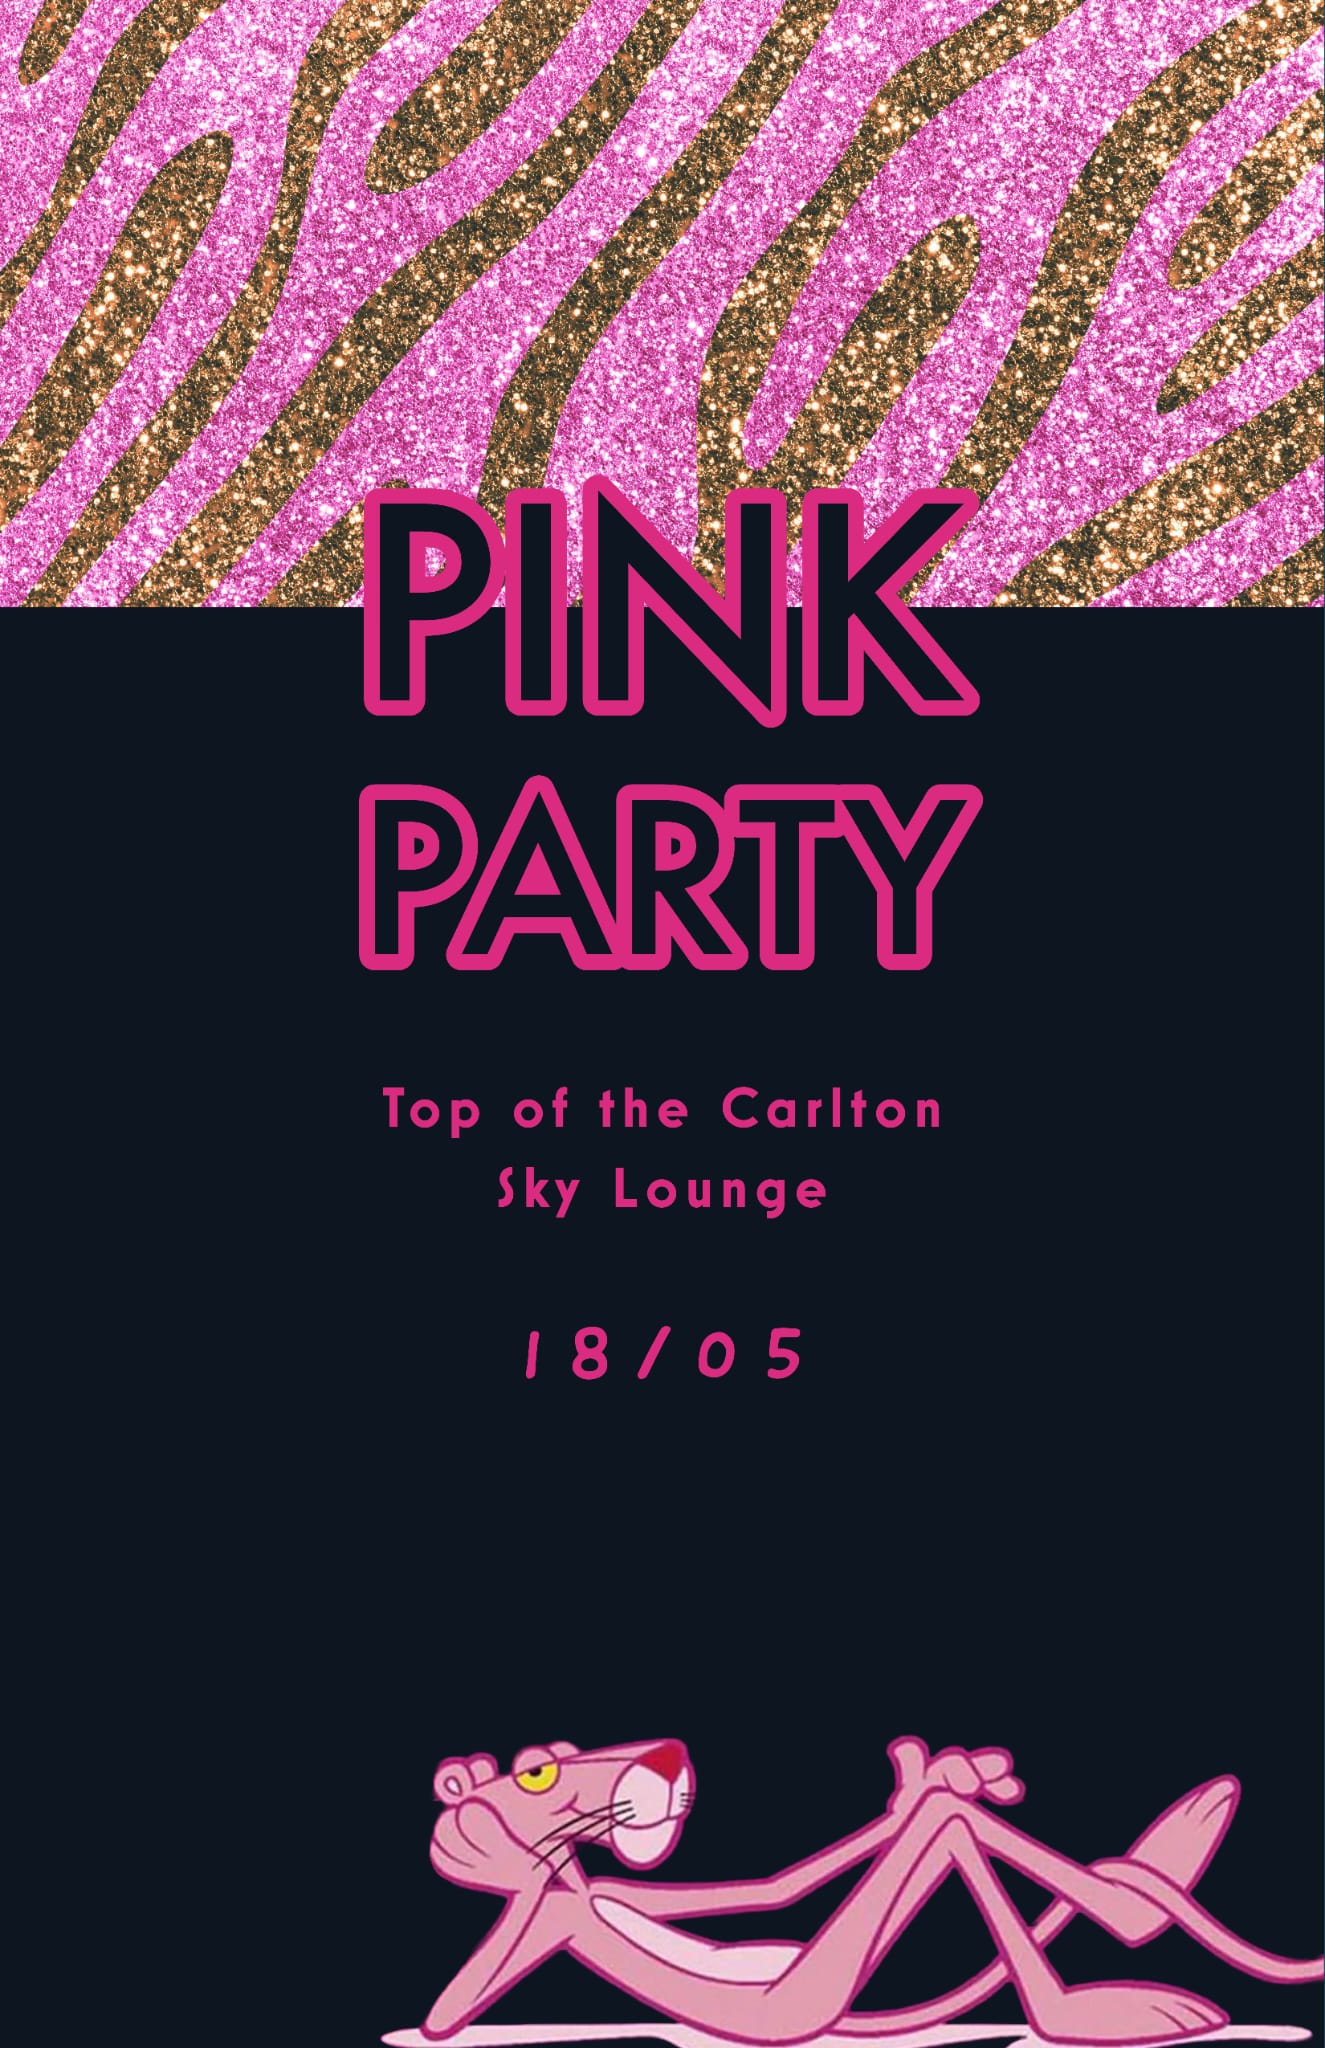 PINK NIGHT PARTY